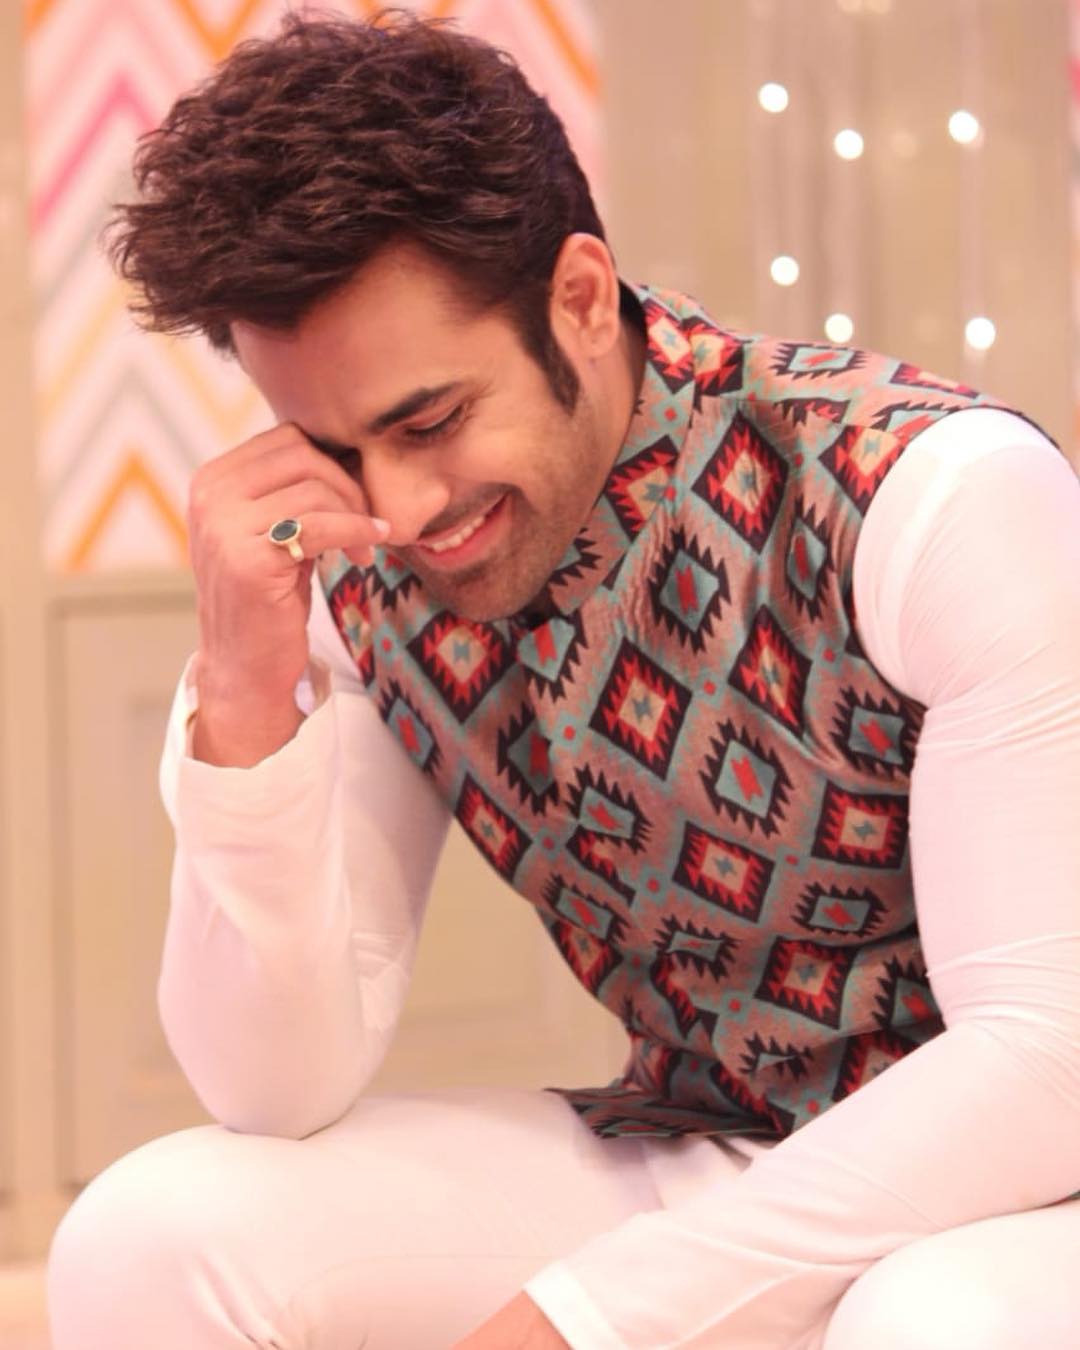 Pearl V Puri, These Clicks Of The Actor Will Make Him Your Next Crush For Sure!